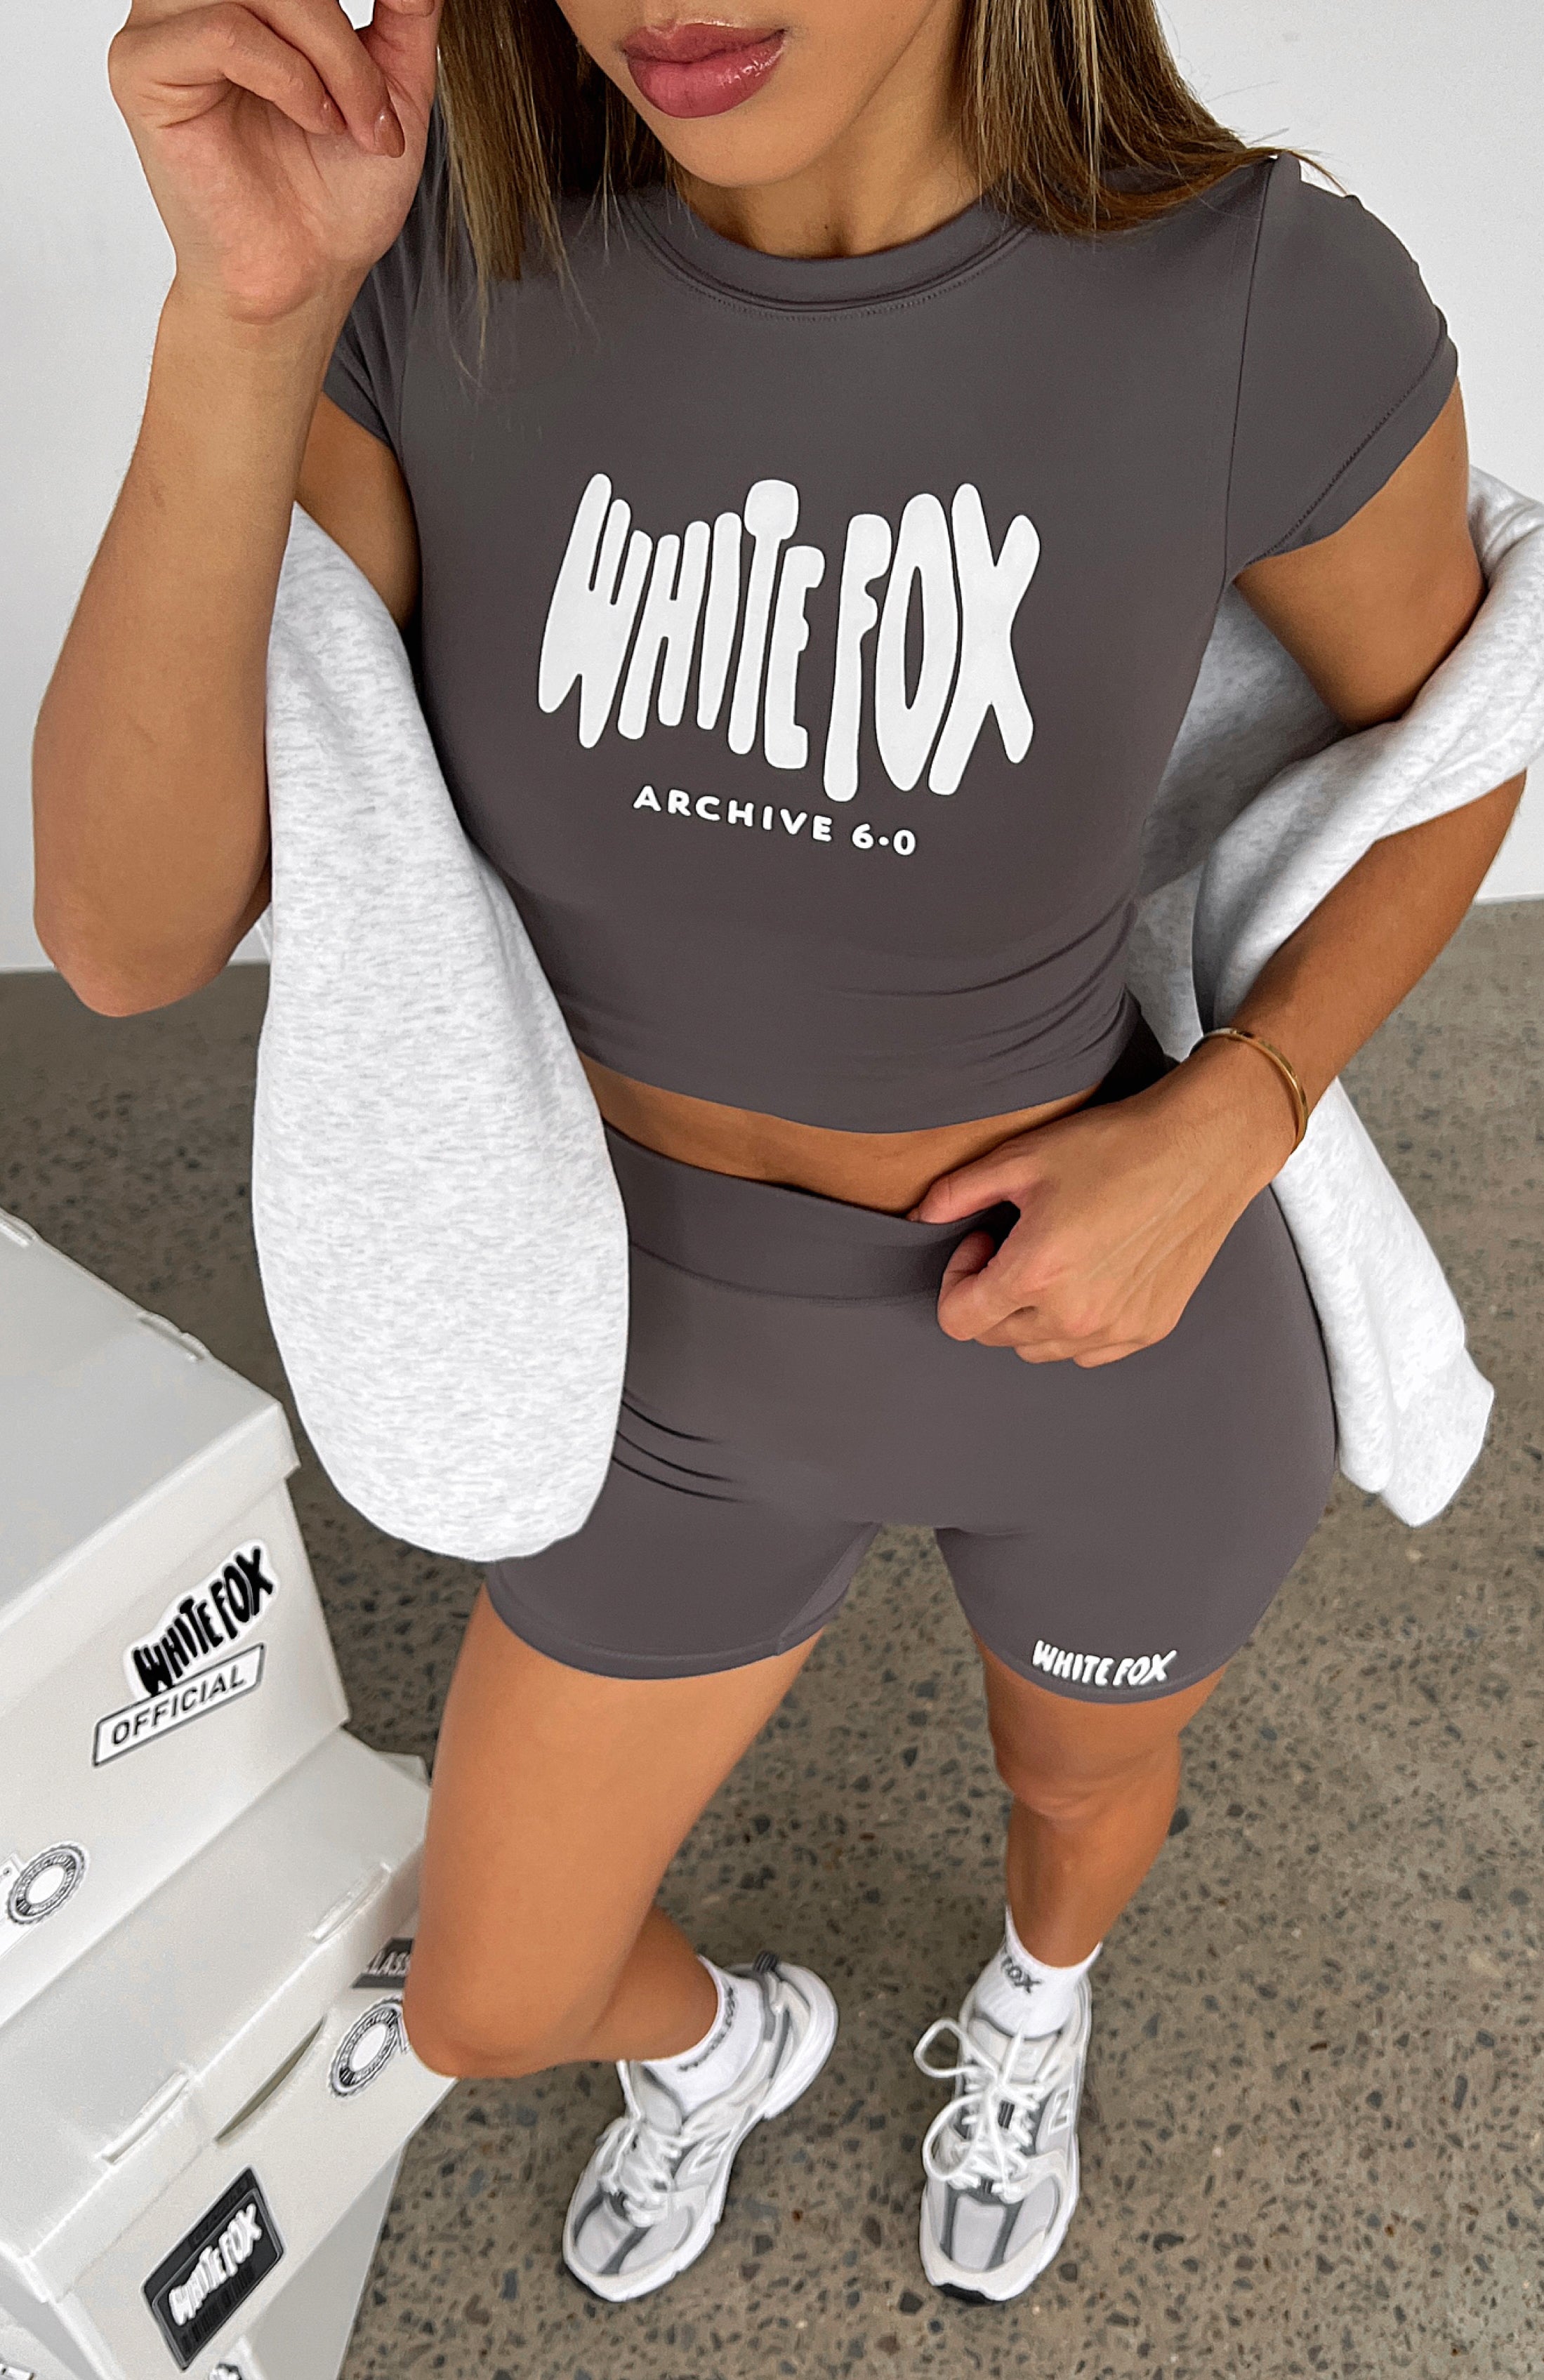 Archive 6.0 Baby Tee Ash | White Fox Boutique